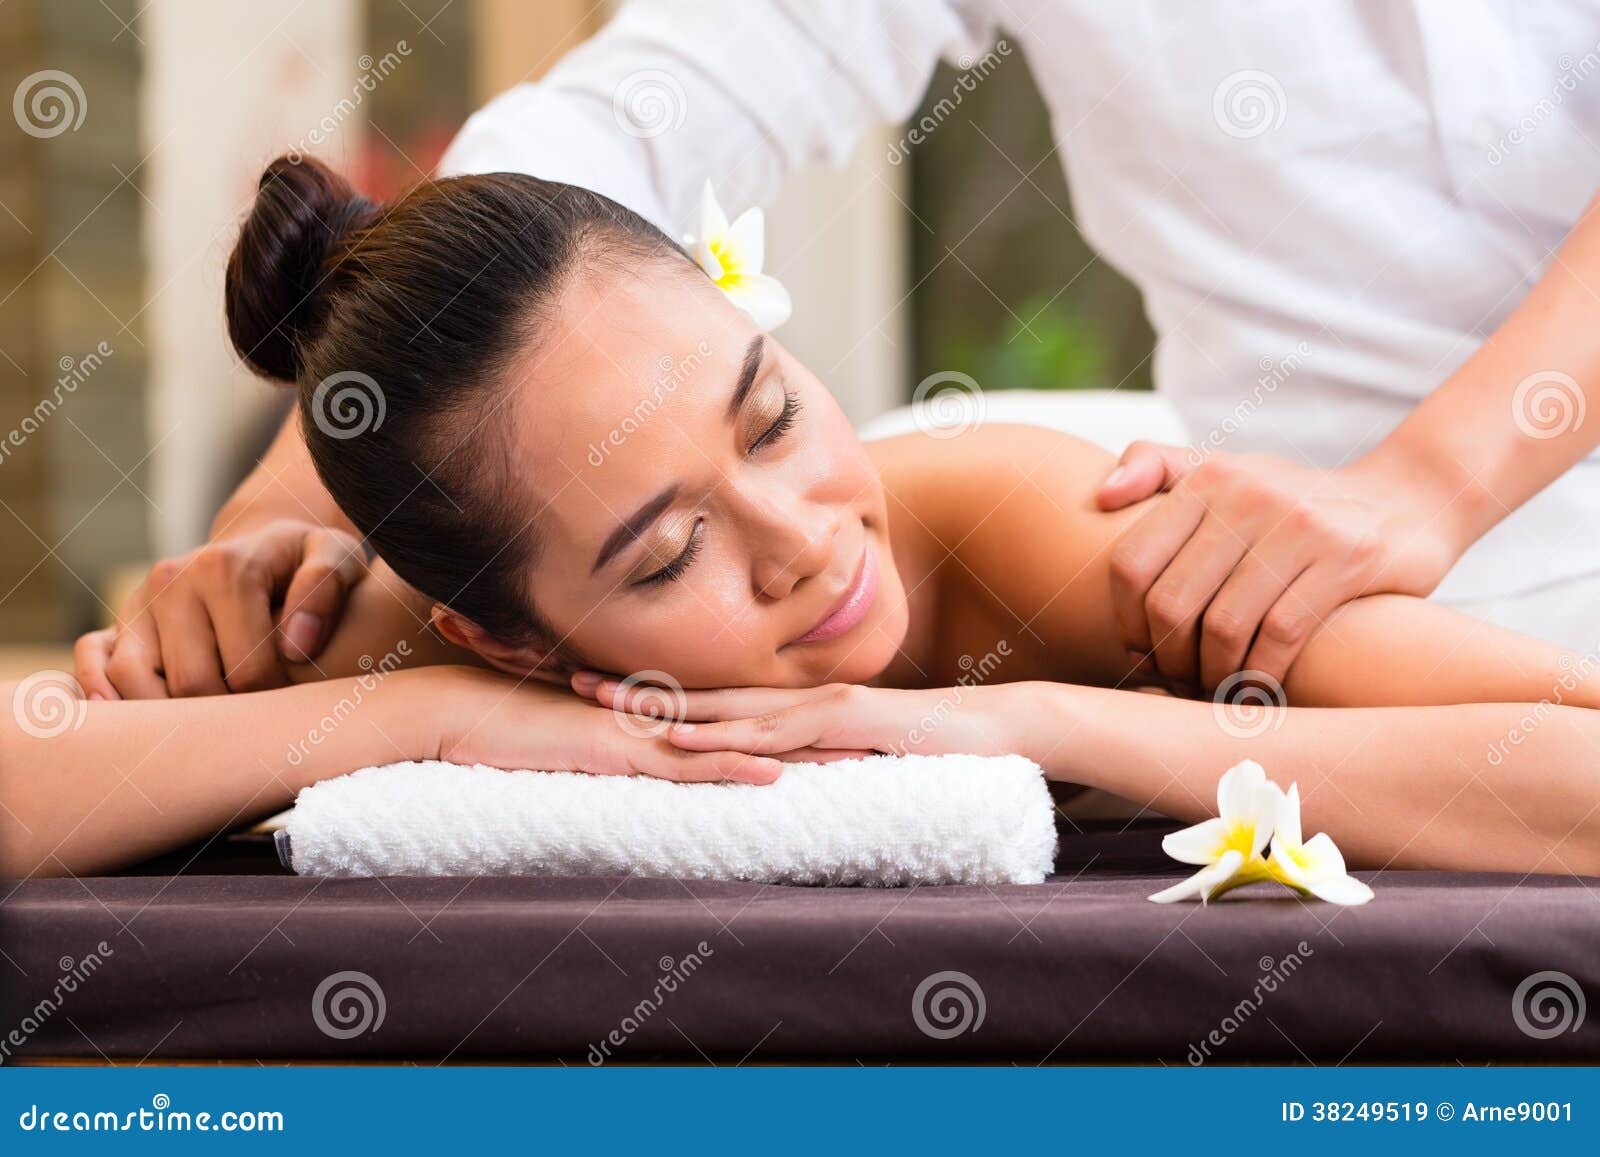 Indonesian Woman Wellness Massage In Spa Stock Image